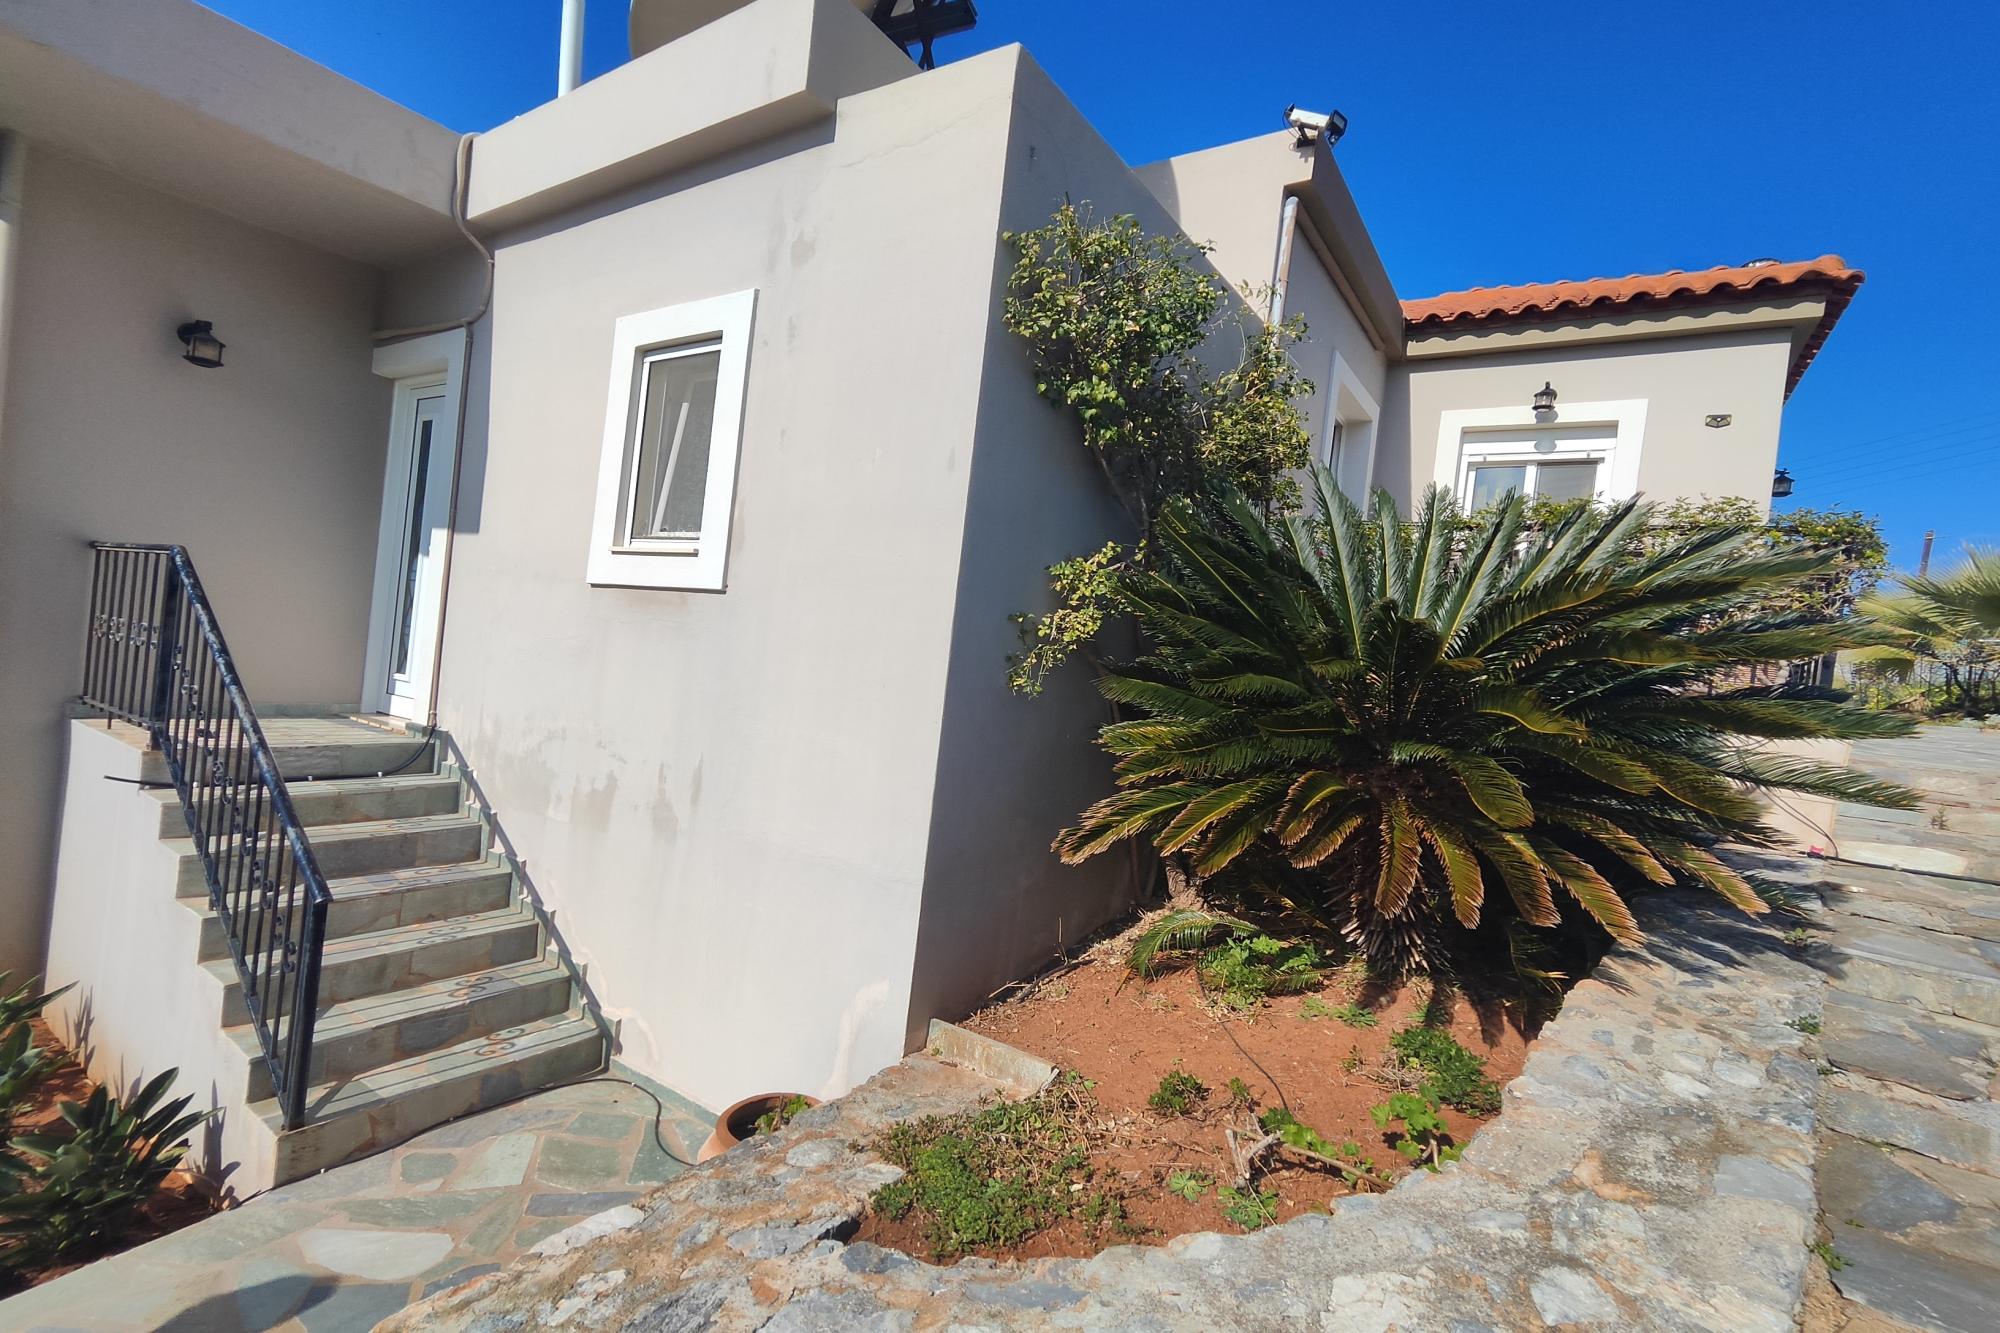 Detached house with guest apartment with sea views. Fully furnished.